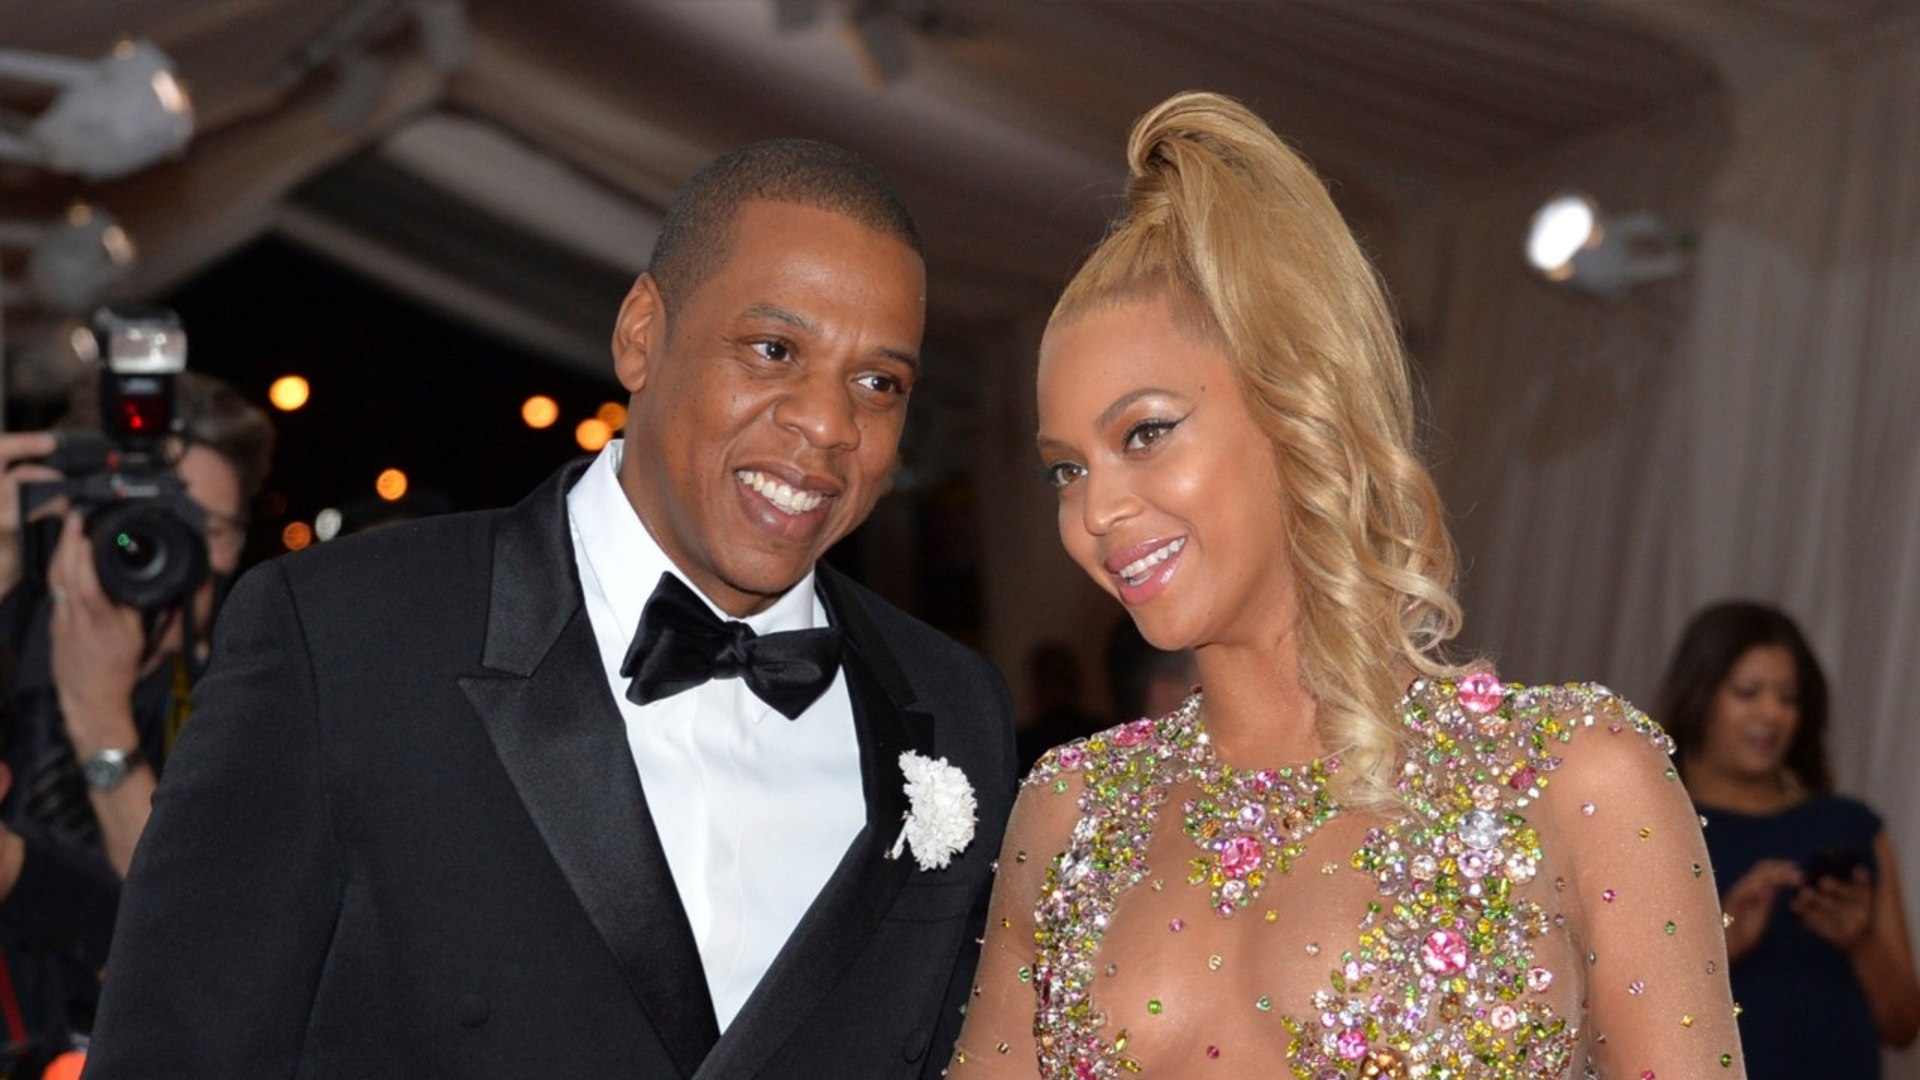 Forbes Confirms Beyoncé and Jay Z's Personal Wealth